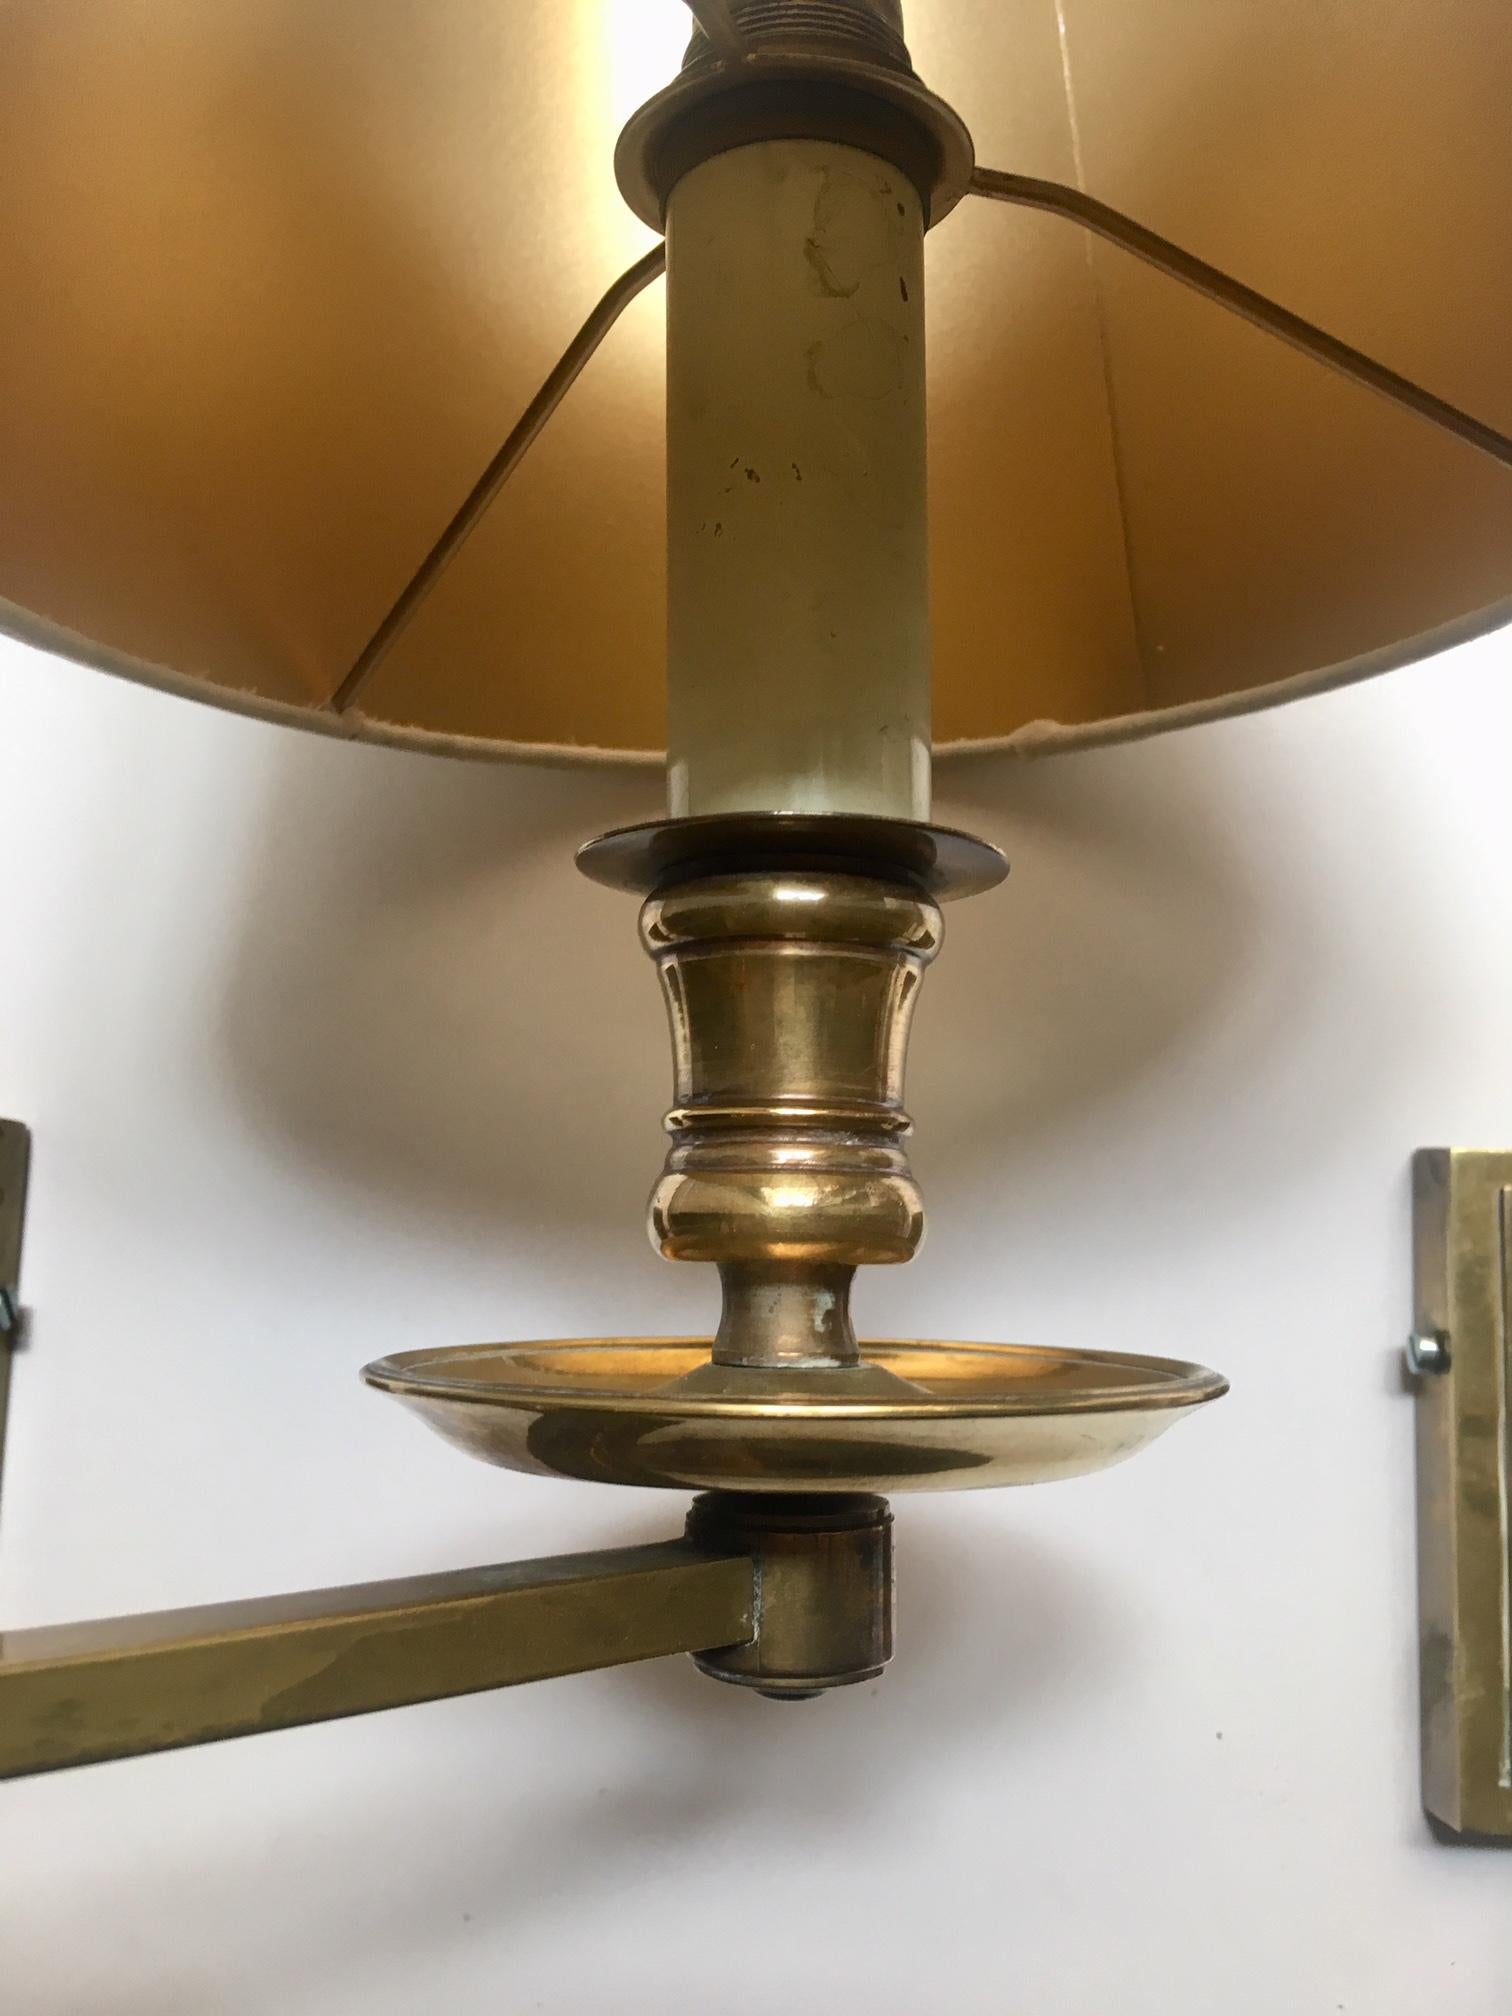 Pair of adjustable swing arms wall sconces, made of brass with age finish.